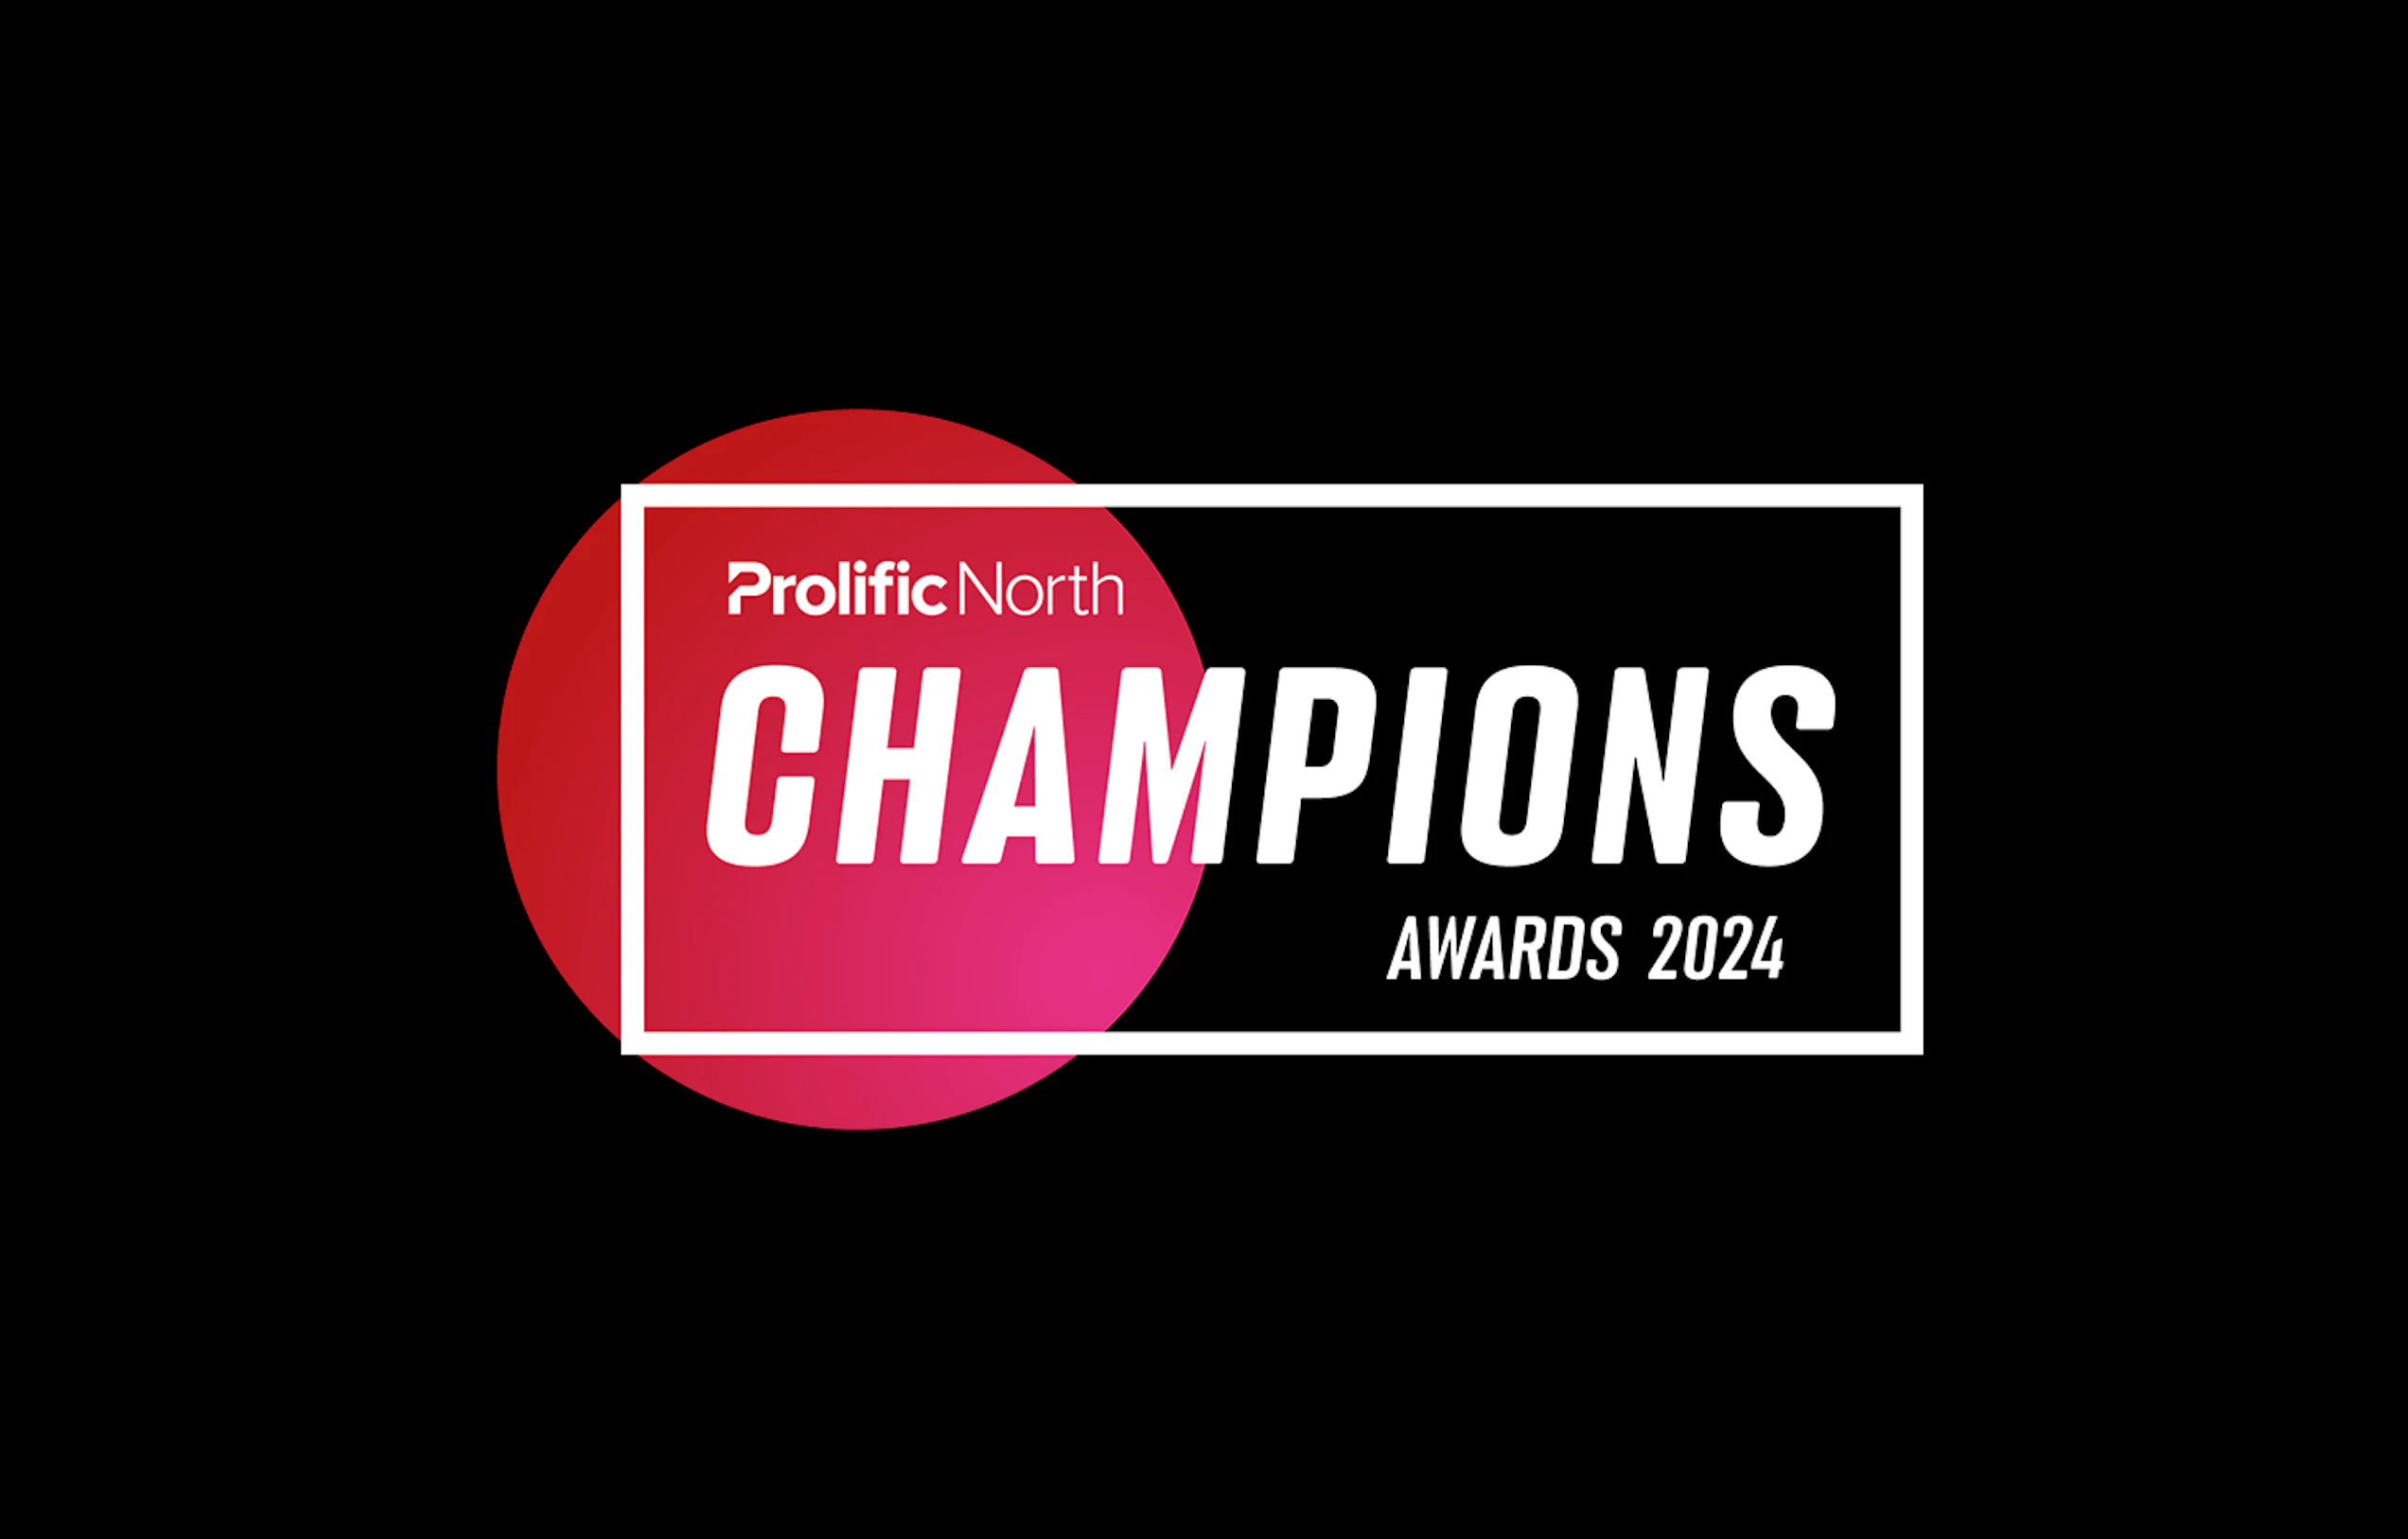 Cover Image for Finalists in two categories at the Prolific North Champions Awards